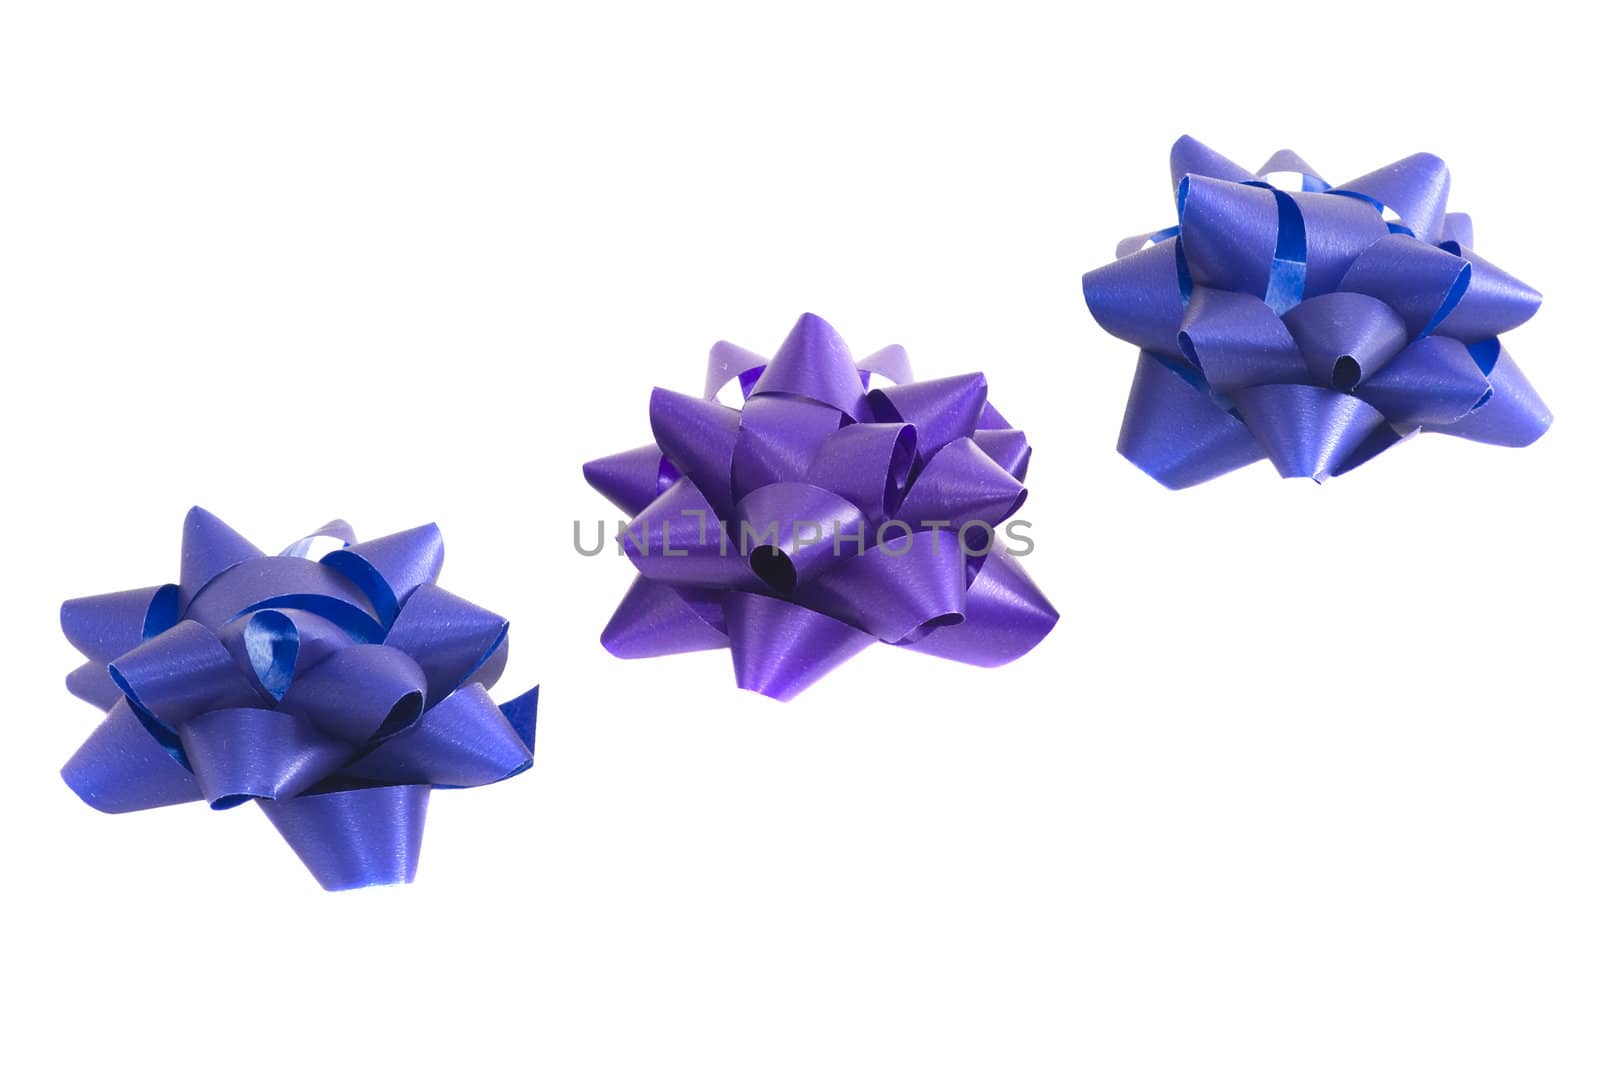 Violet and blue bows by Dan70